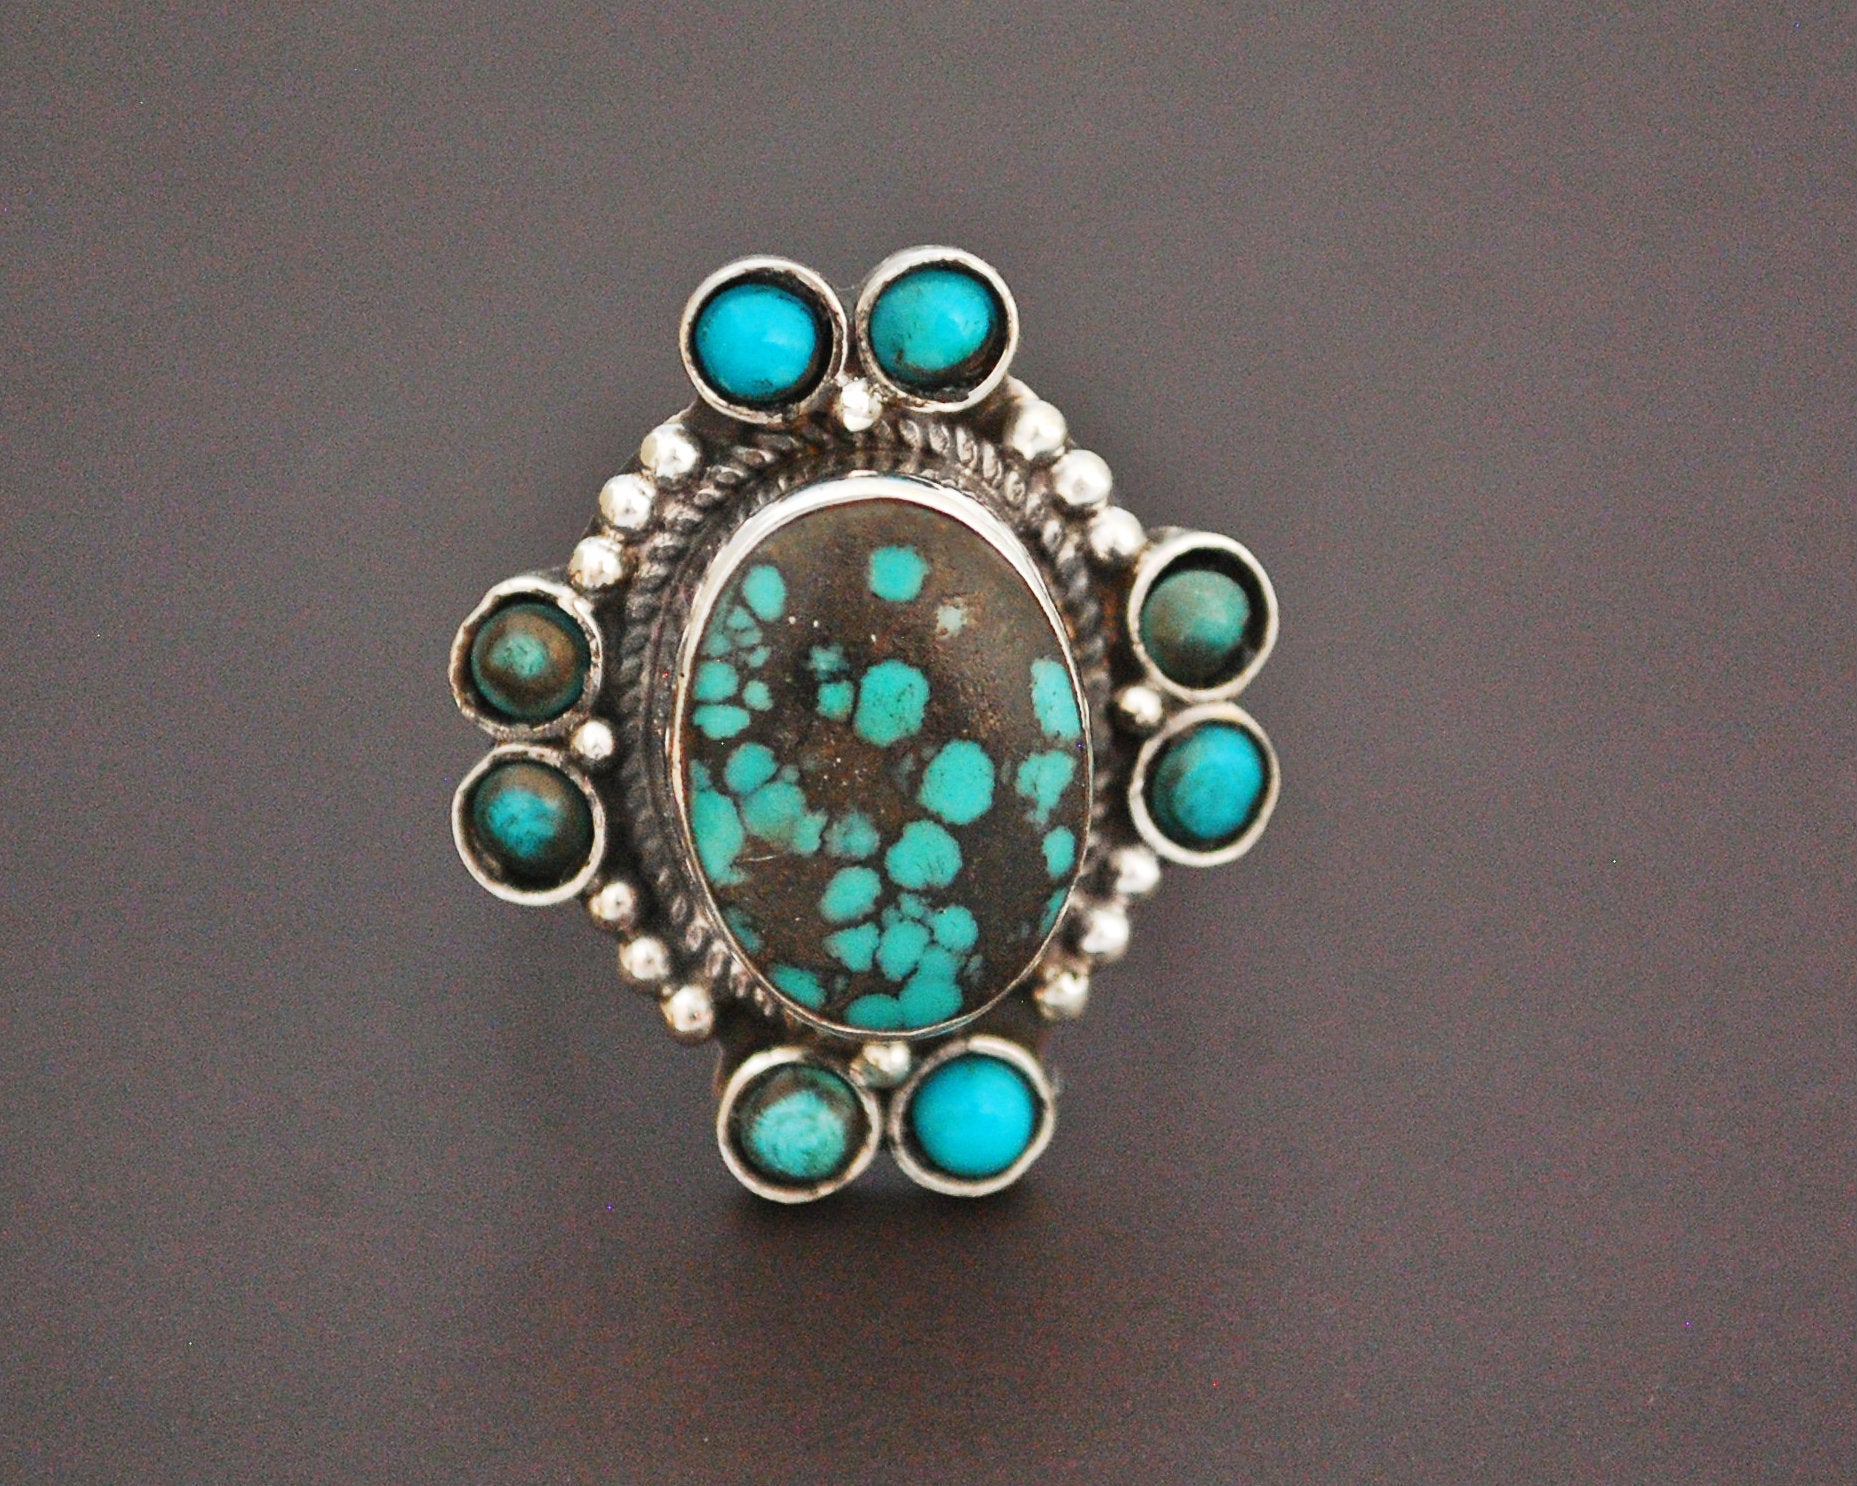 Ethnic Turquoise Ring from India - Size 9.5